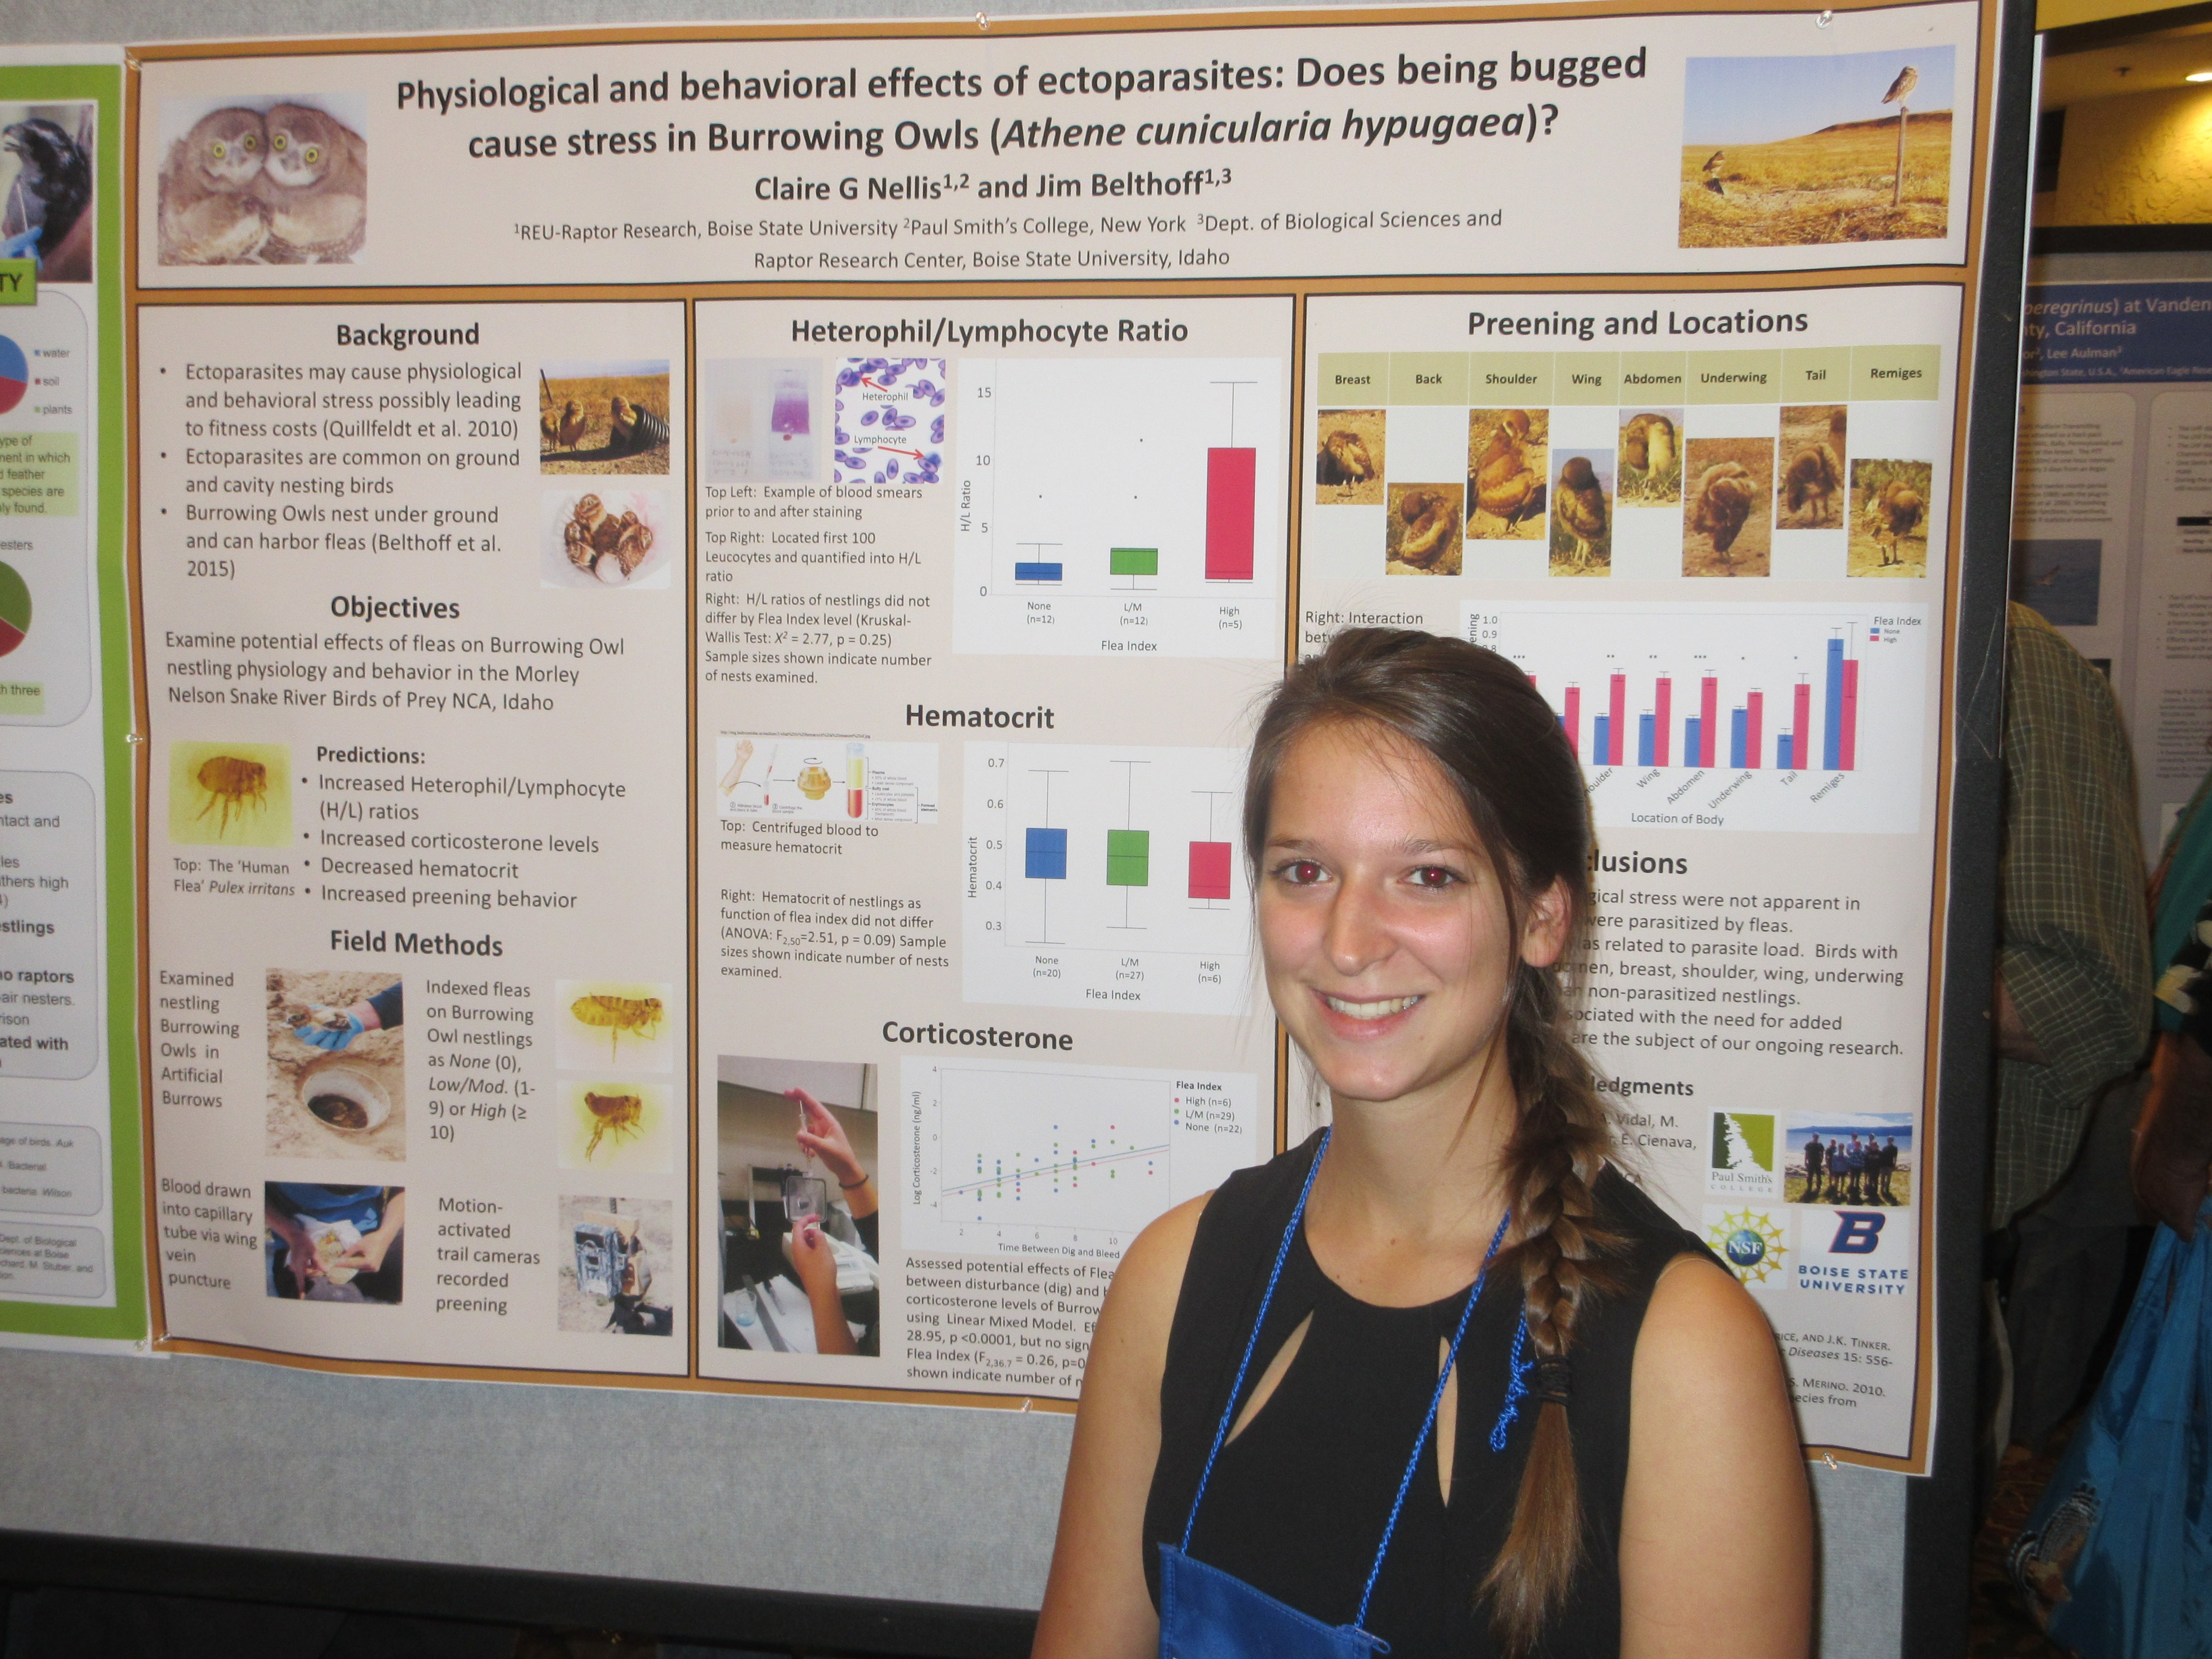 Student smiling in front of academic poster presentation